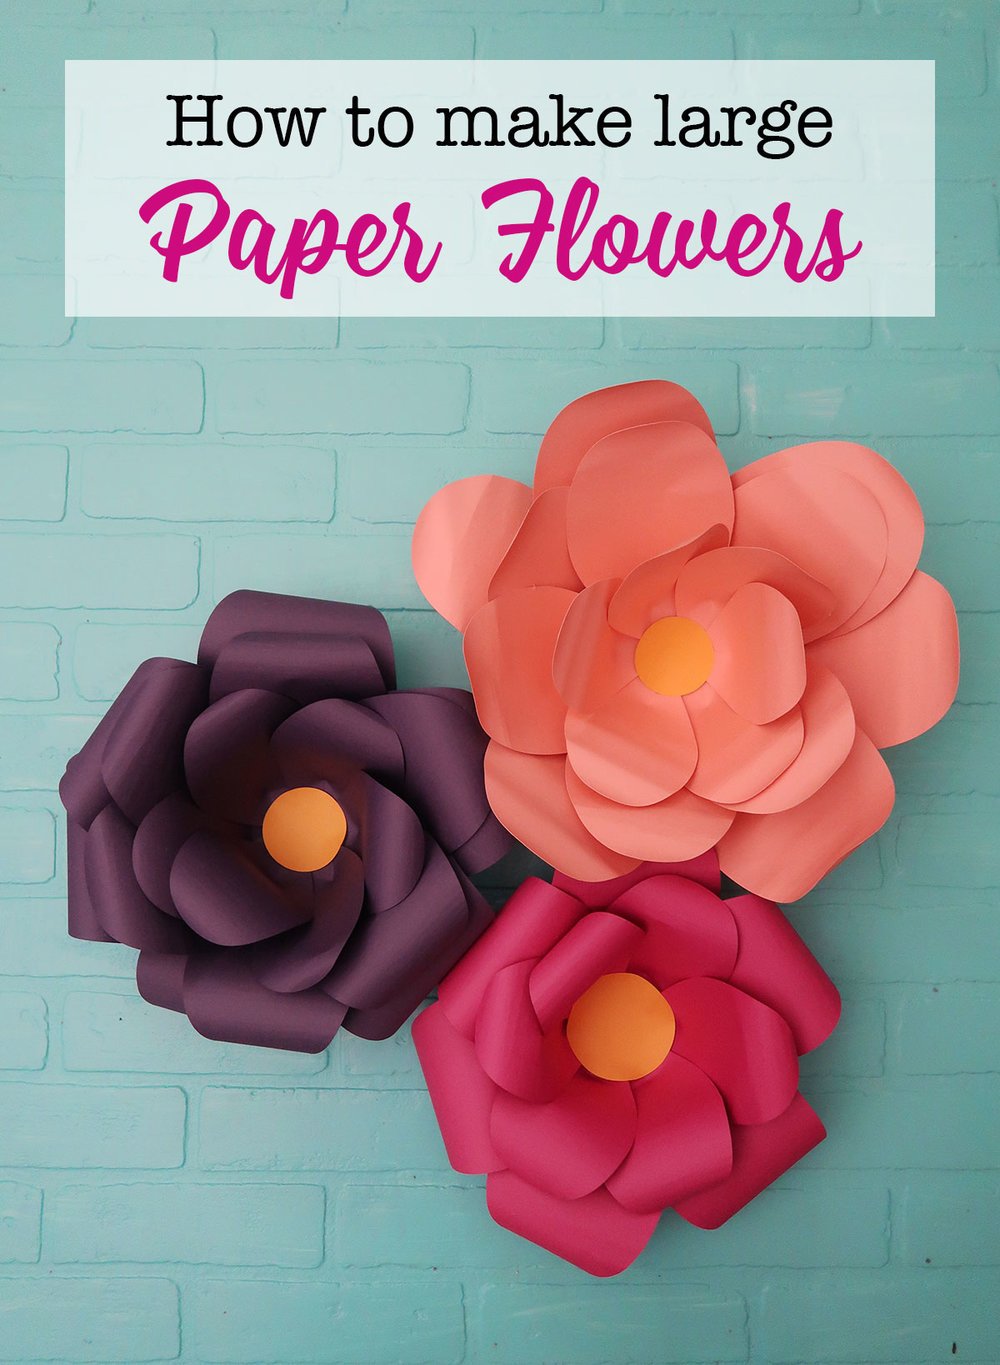 How to make large paper flowers